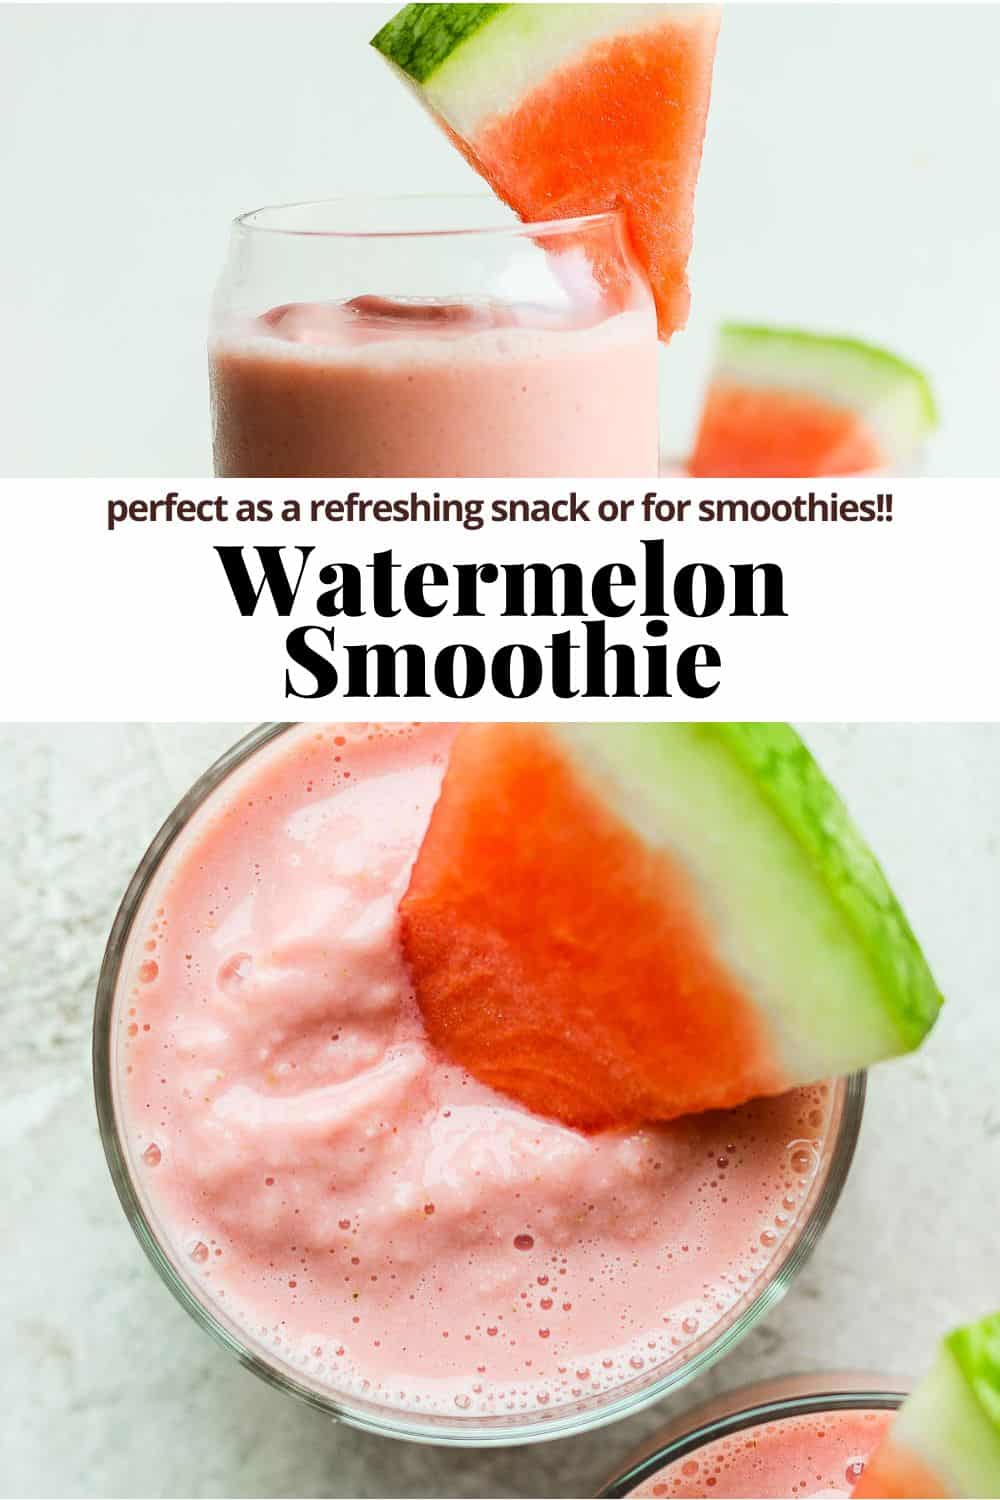 Pinterest image for a watermelon smoothie.